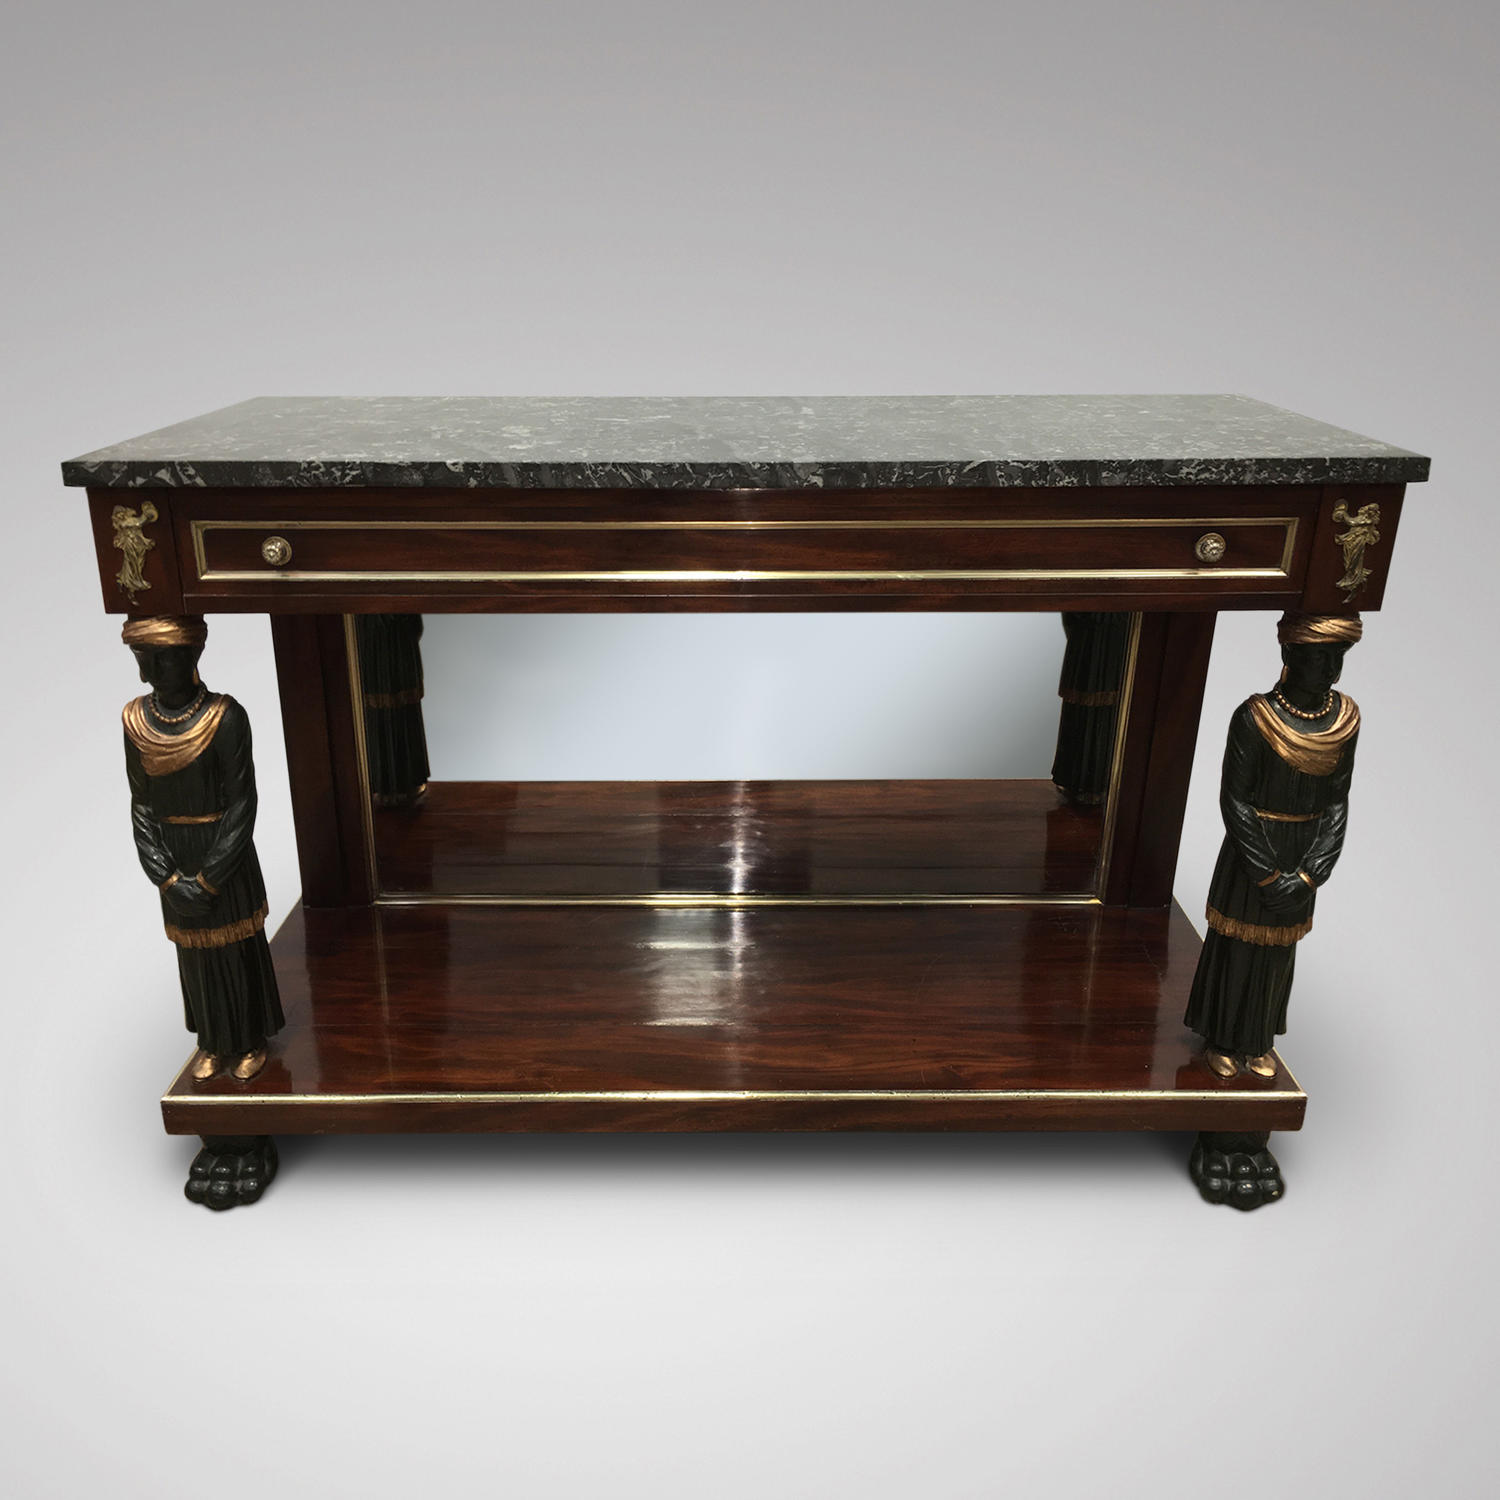 EARLY 19TH CENTURY CONSOLE,NORTHERN EUROPE